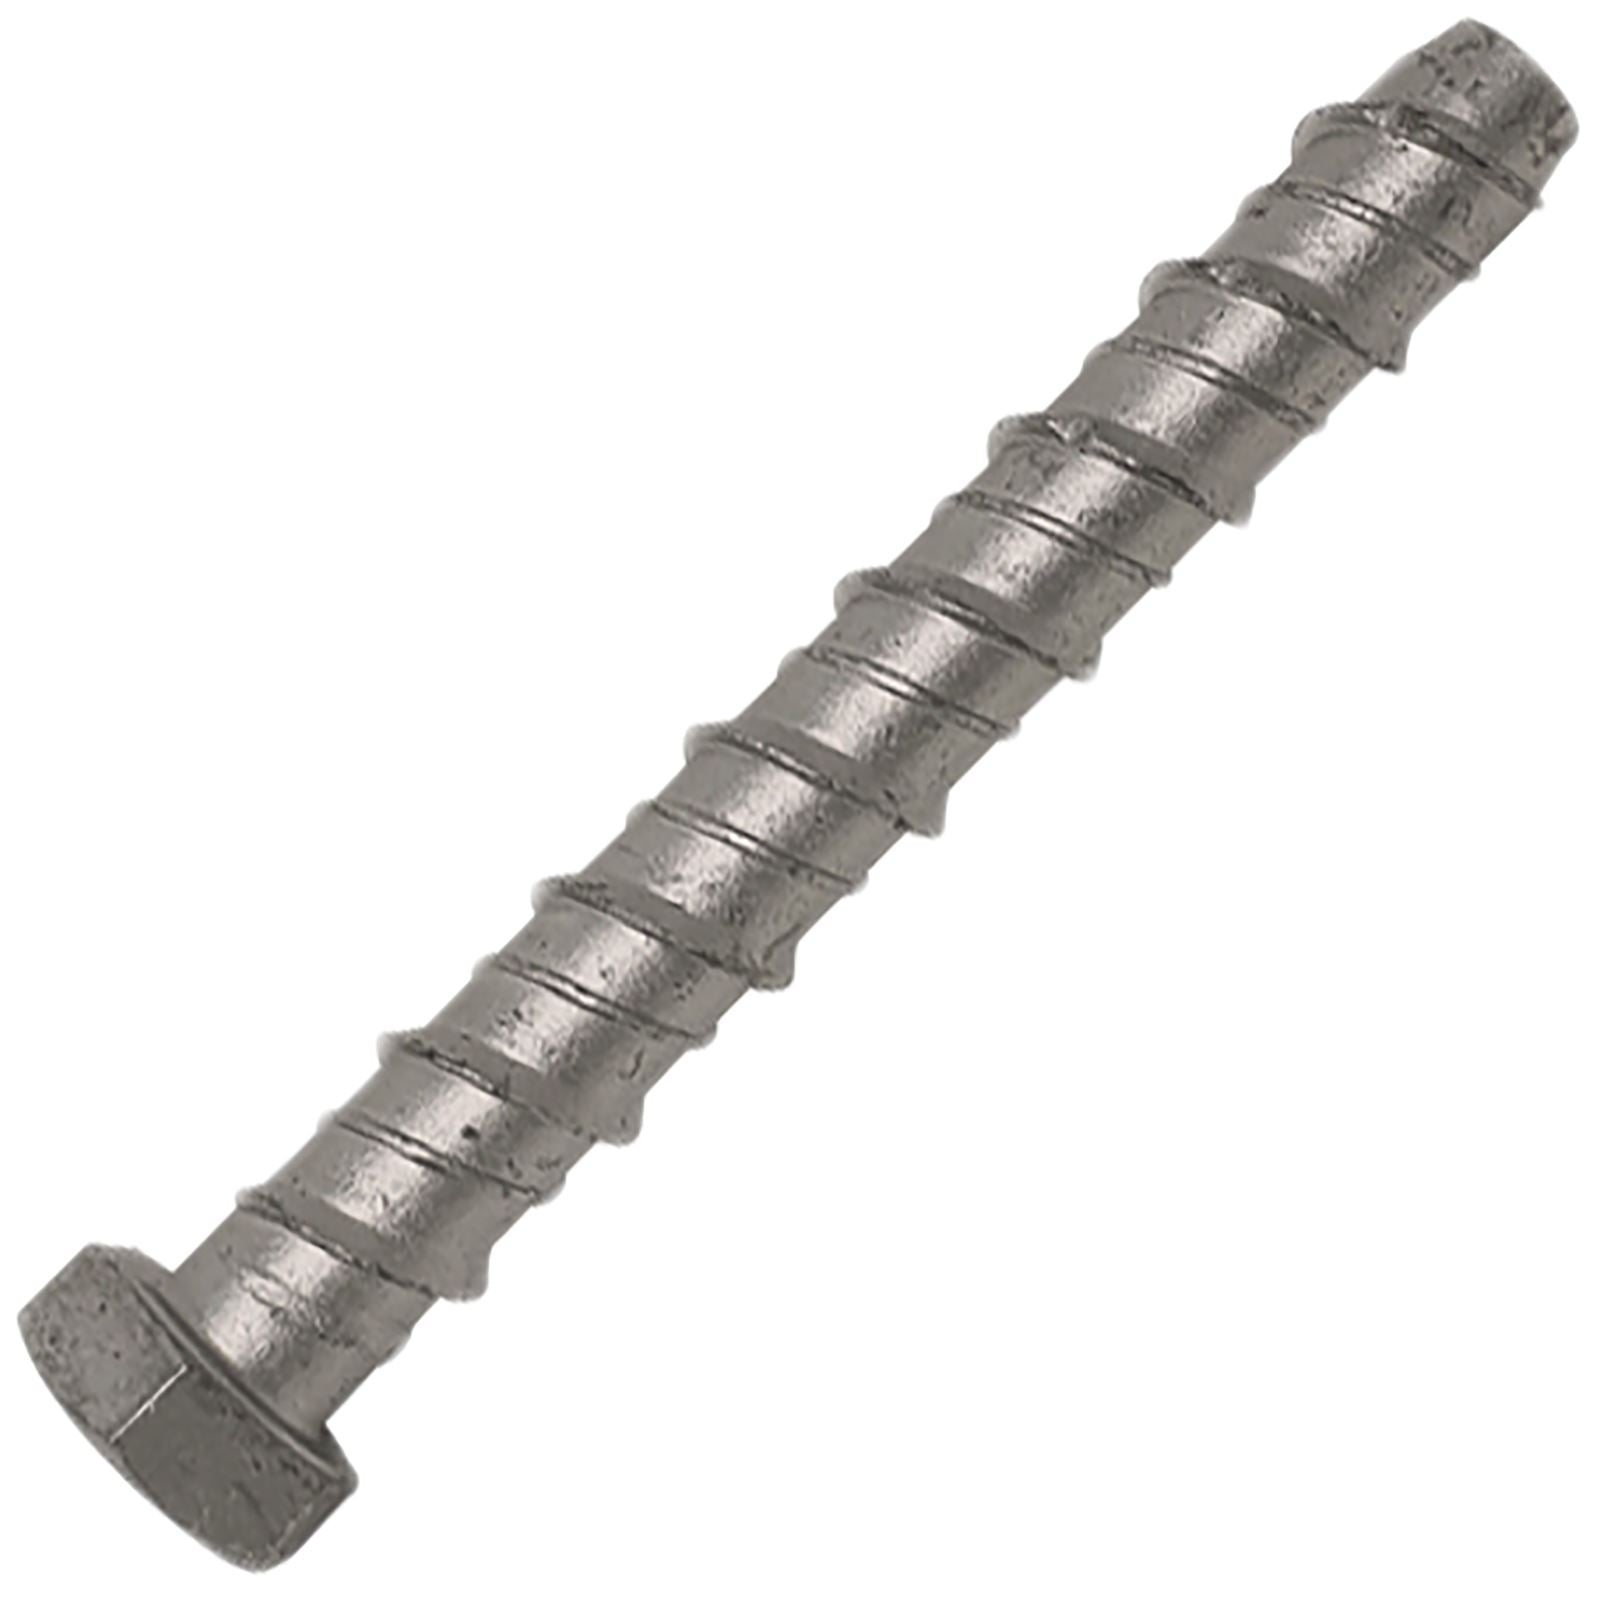 ForgeFix Concrete Bolts Hex Head M8-M16 60-200mm Long Self Tapping Bolt